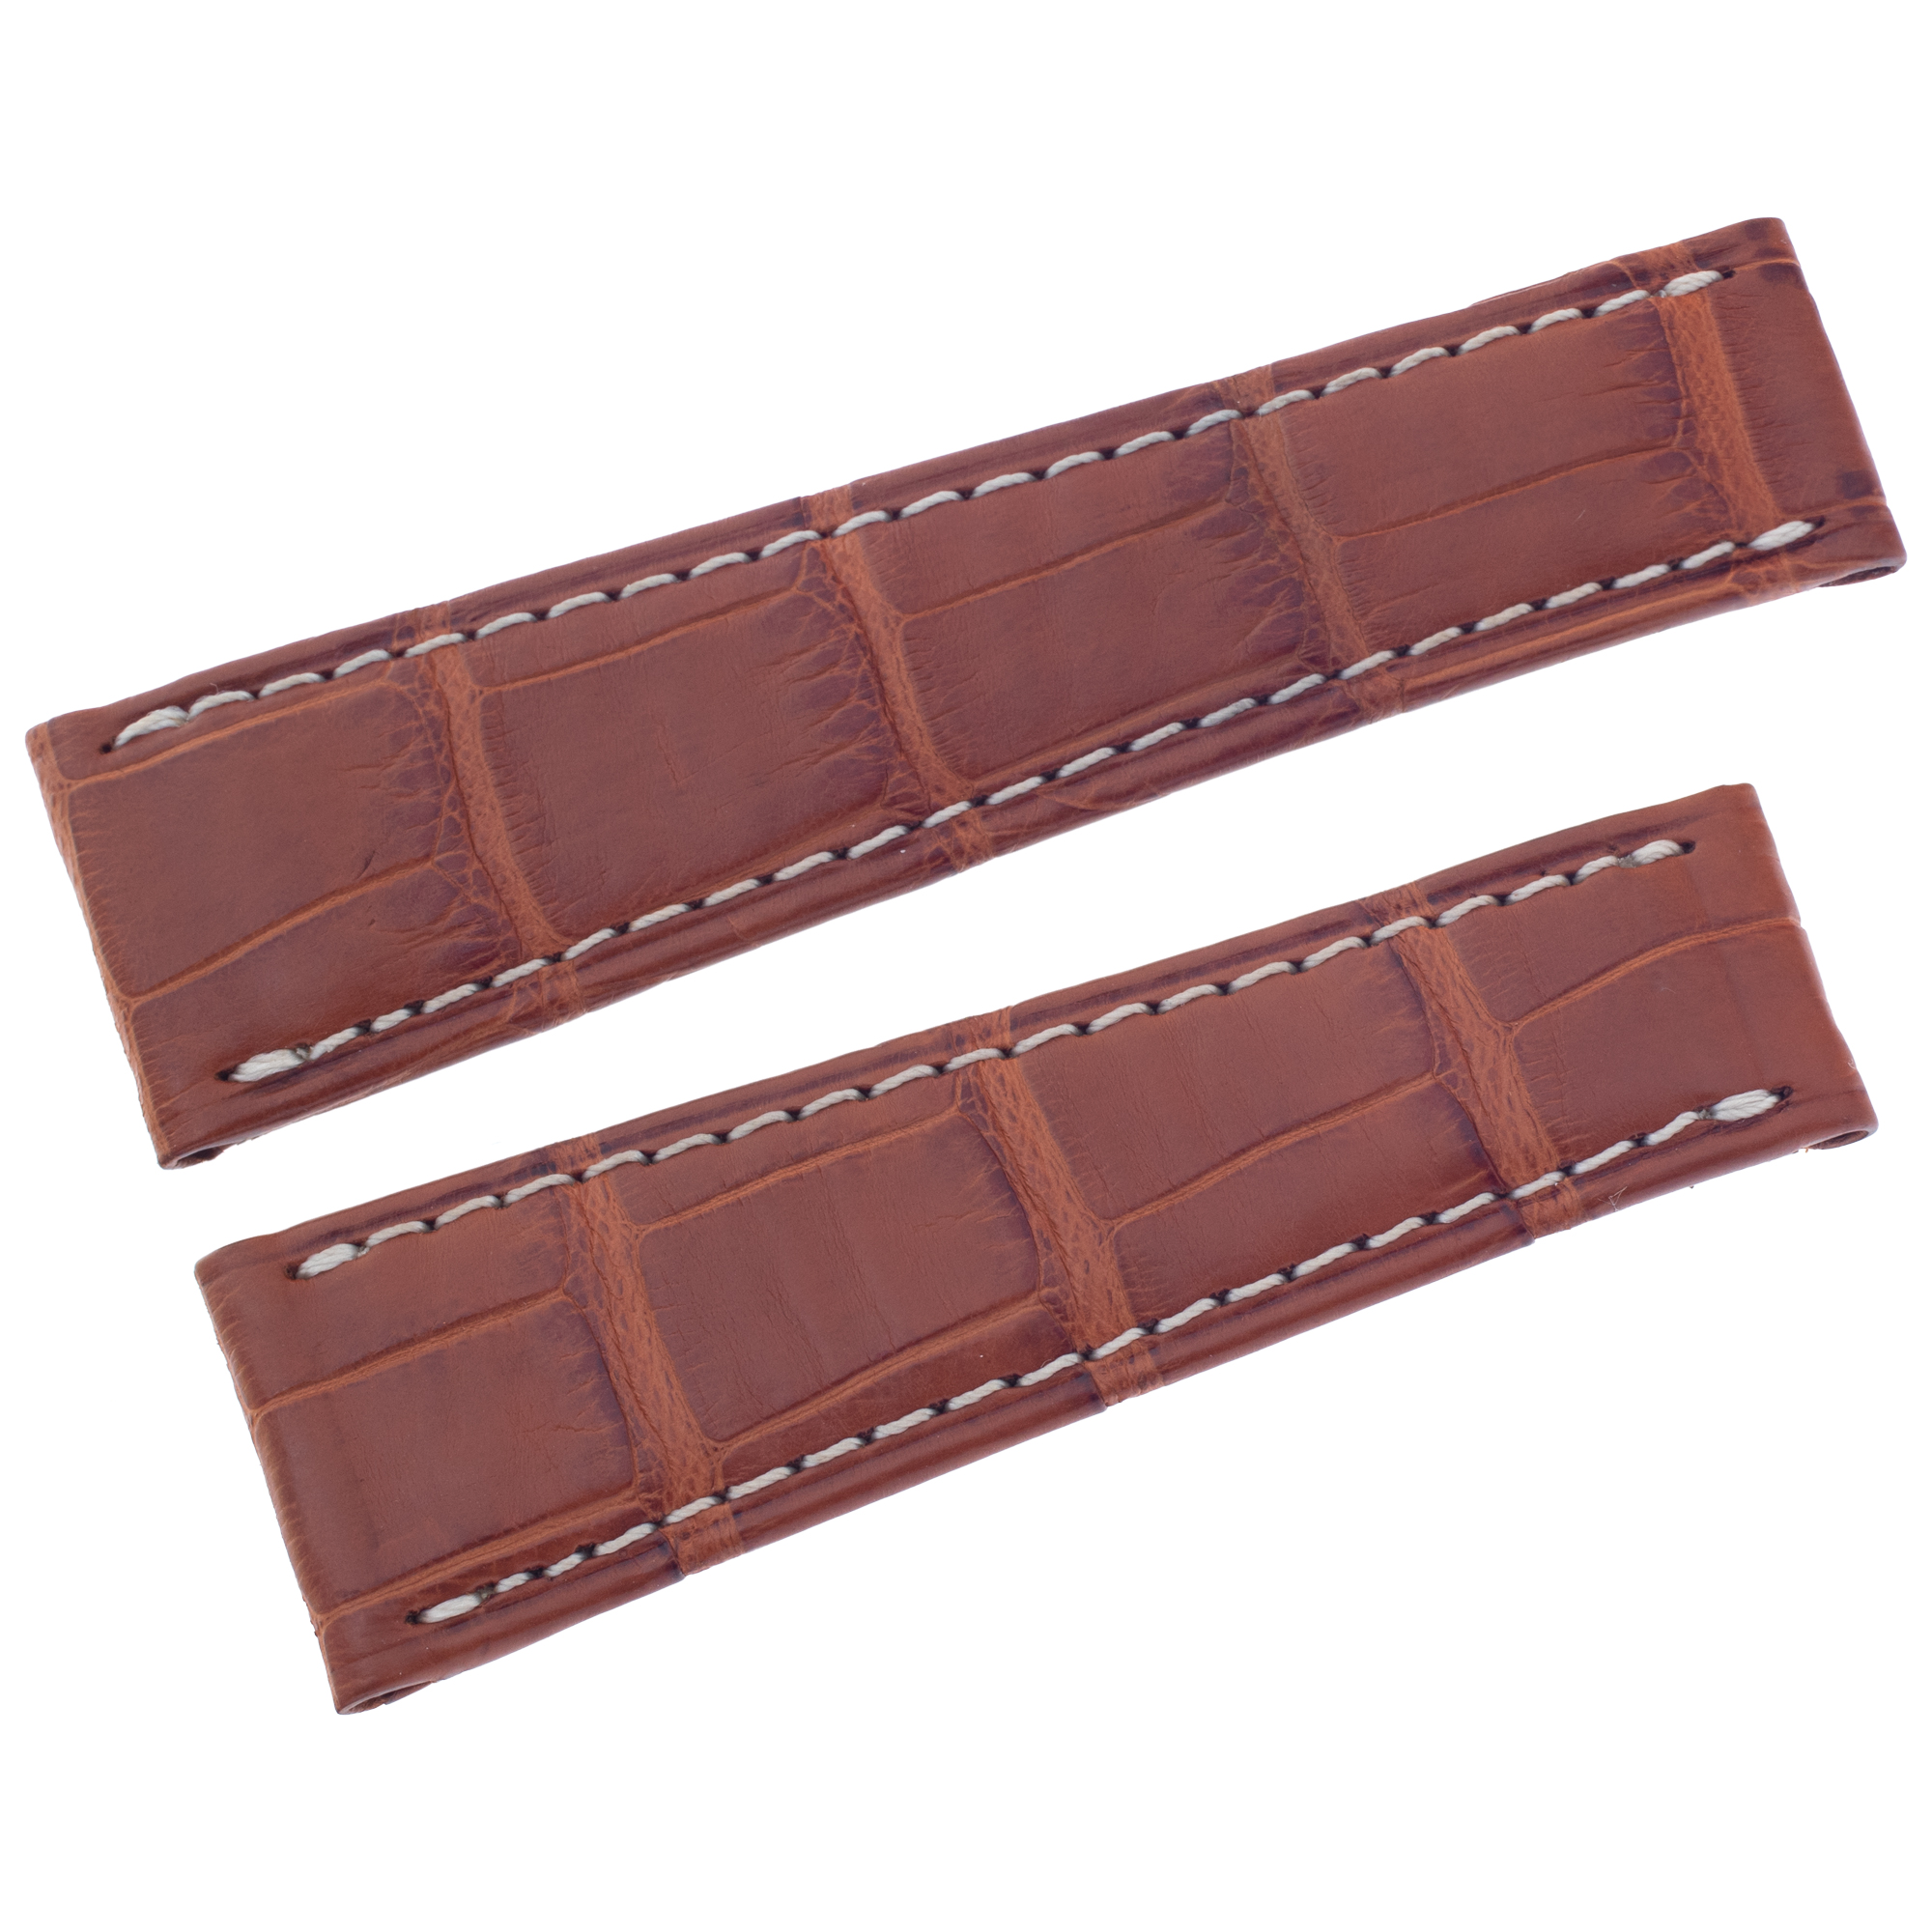 Rolex Daytona Brown alligator watch band (20 x 16). 20mm width by the lug end and 16 mm width by the buckle end. Length: 3" long piece and 2.5" short piece. image 1